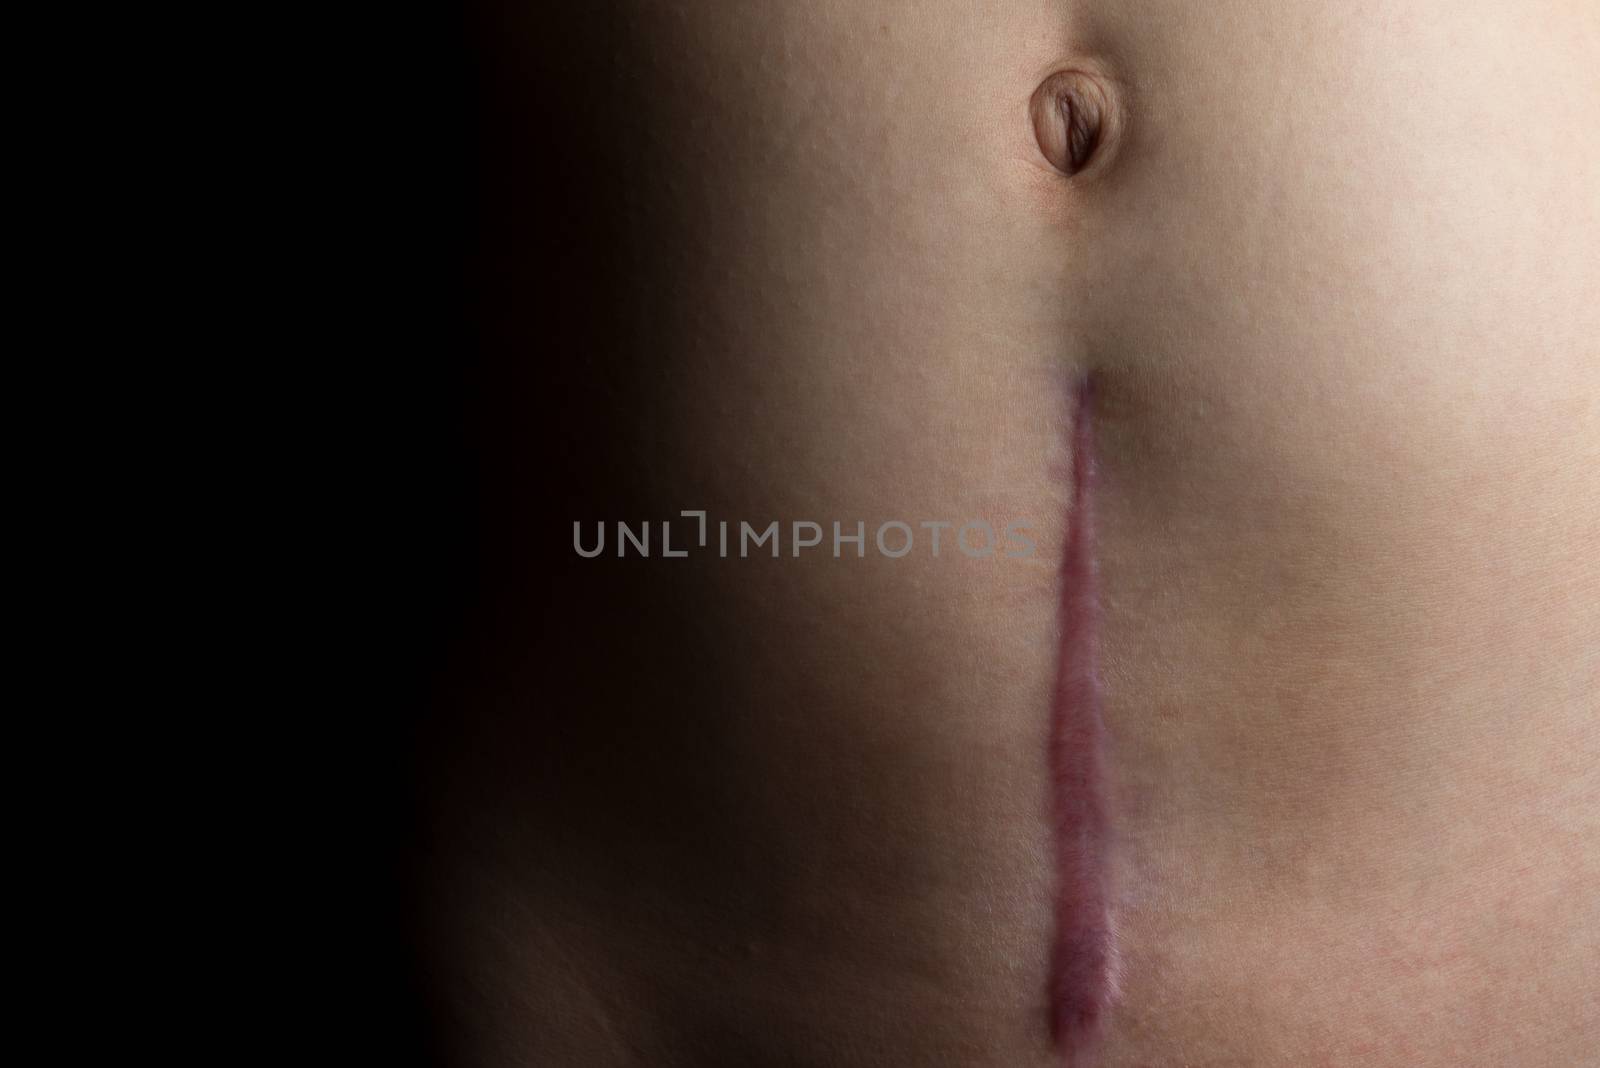 A recovering scar from a c-section operation dramatically faded to black.